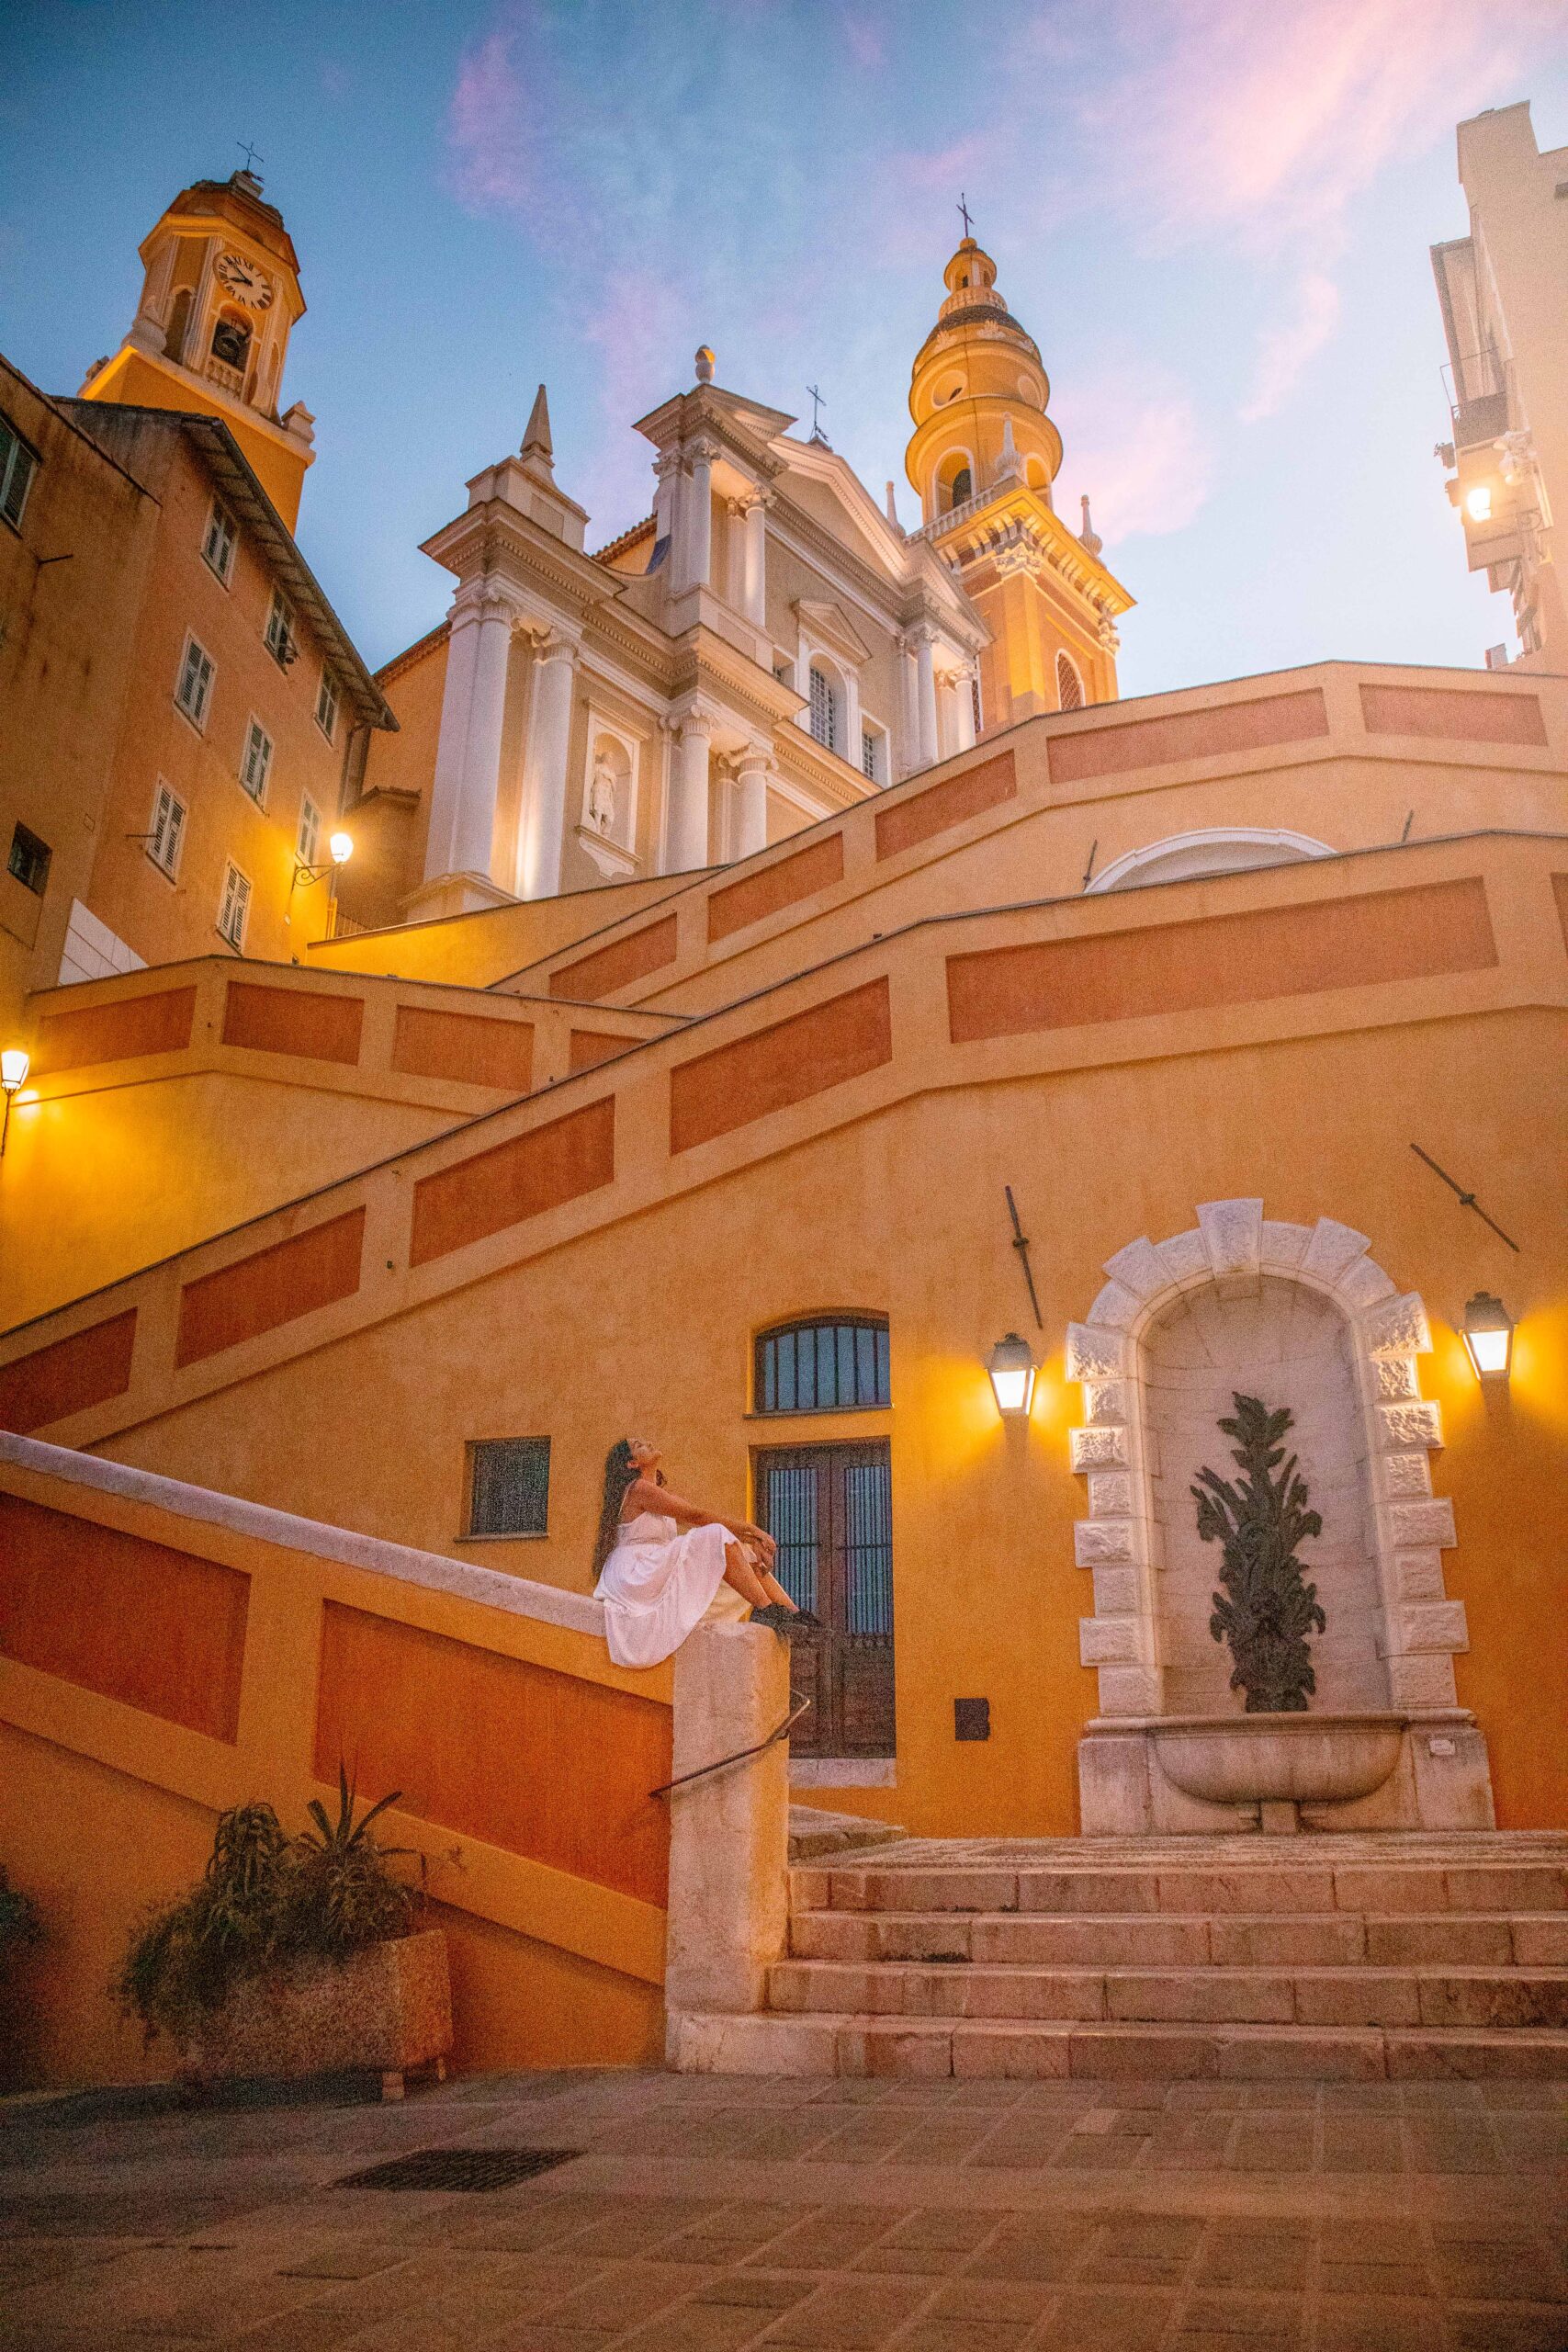 Woman wearing a white dress sitting on a yellow and orange staircase leading to the Saint Michael Archangel Basilica during sunset in the Old Town of Menton, France